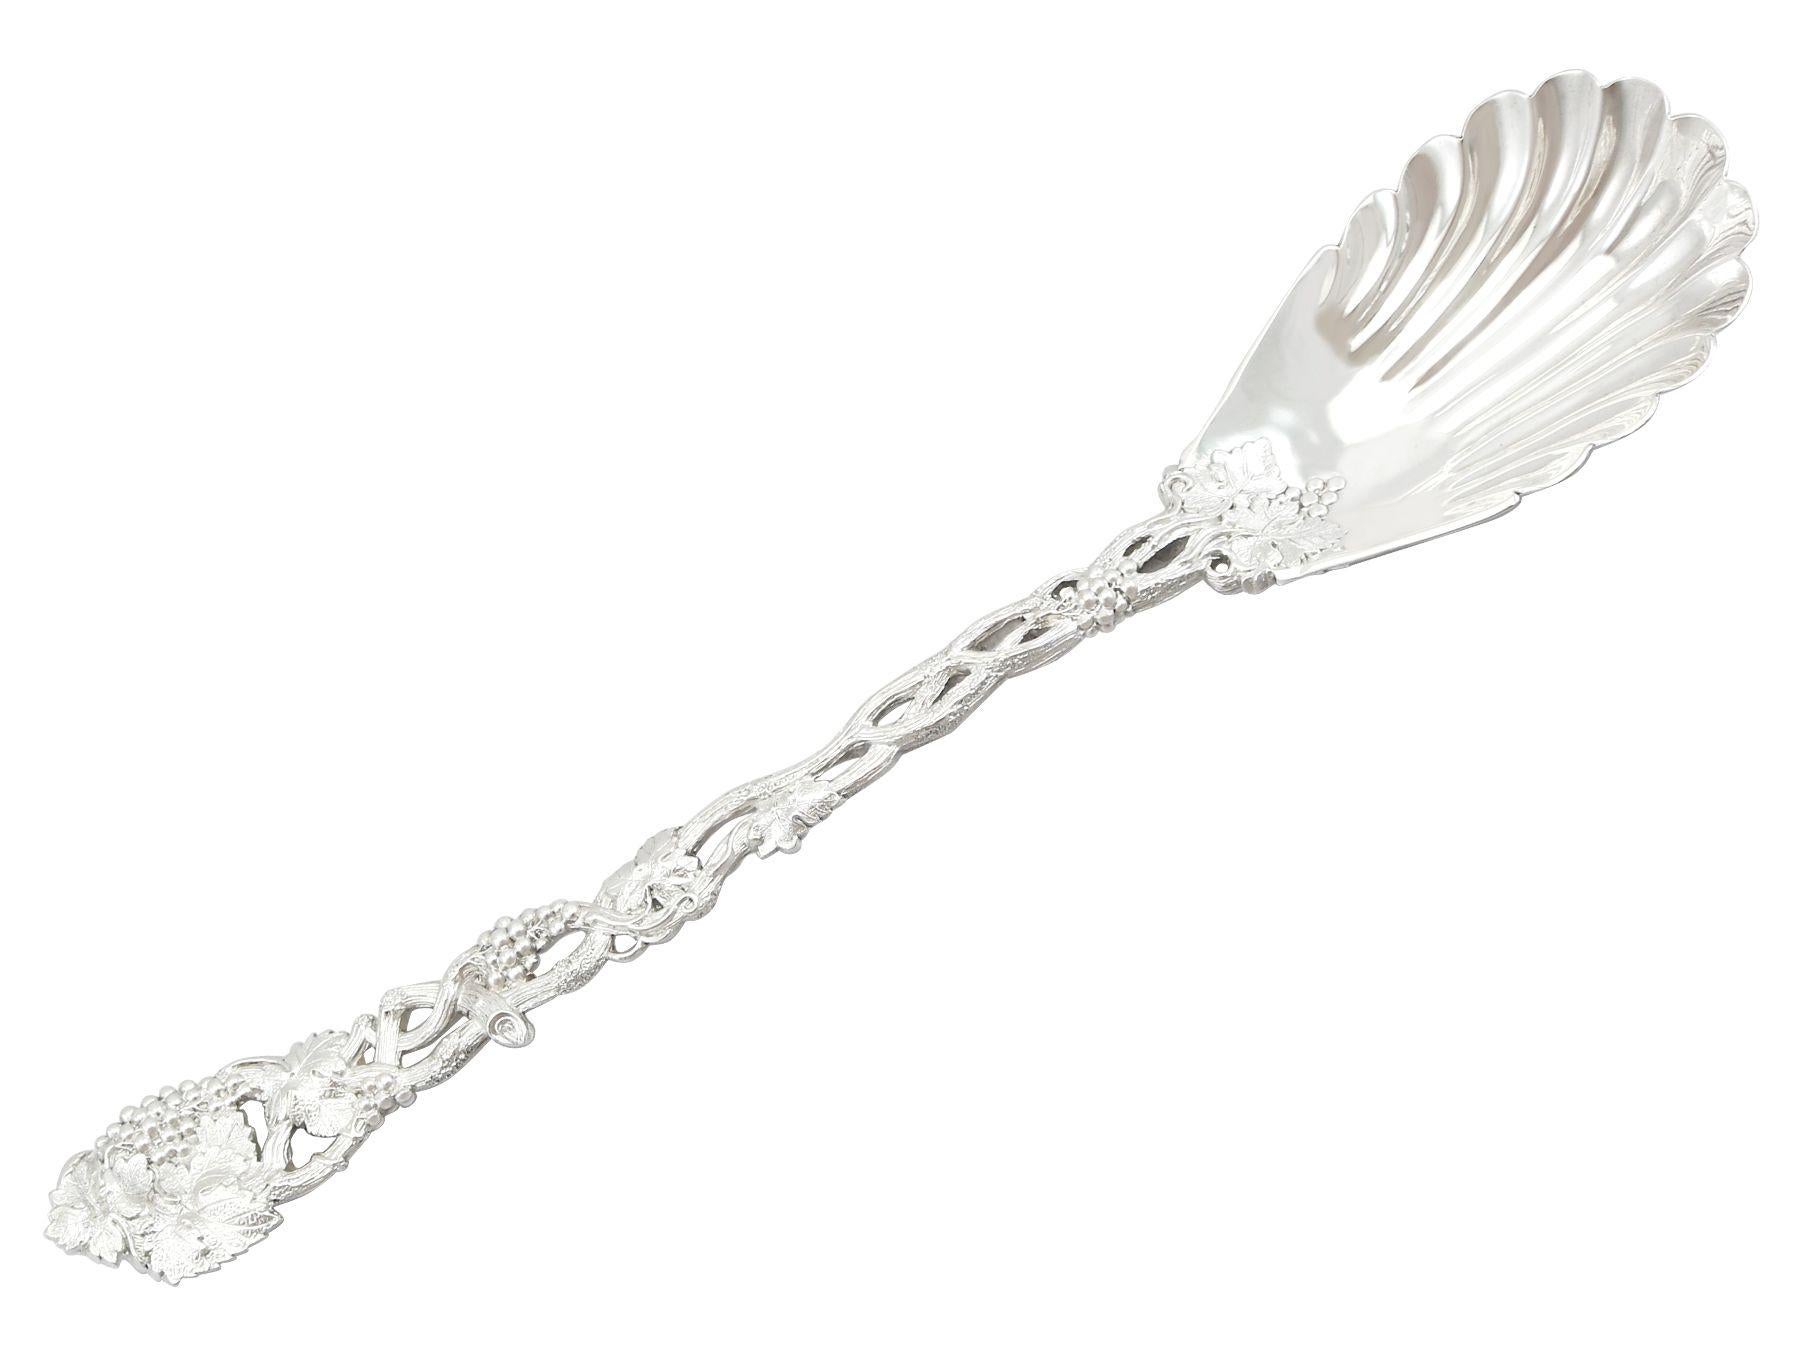 A magnificent, fine and impressive, pair of antique Victorian sterling silver Pierced Vine pattern serving spoons; an addition to our silver flatware collection.

These magnificent antique silver spoons, in sterling standard have been crafted in